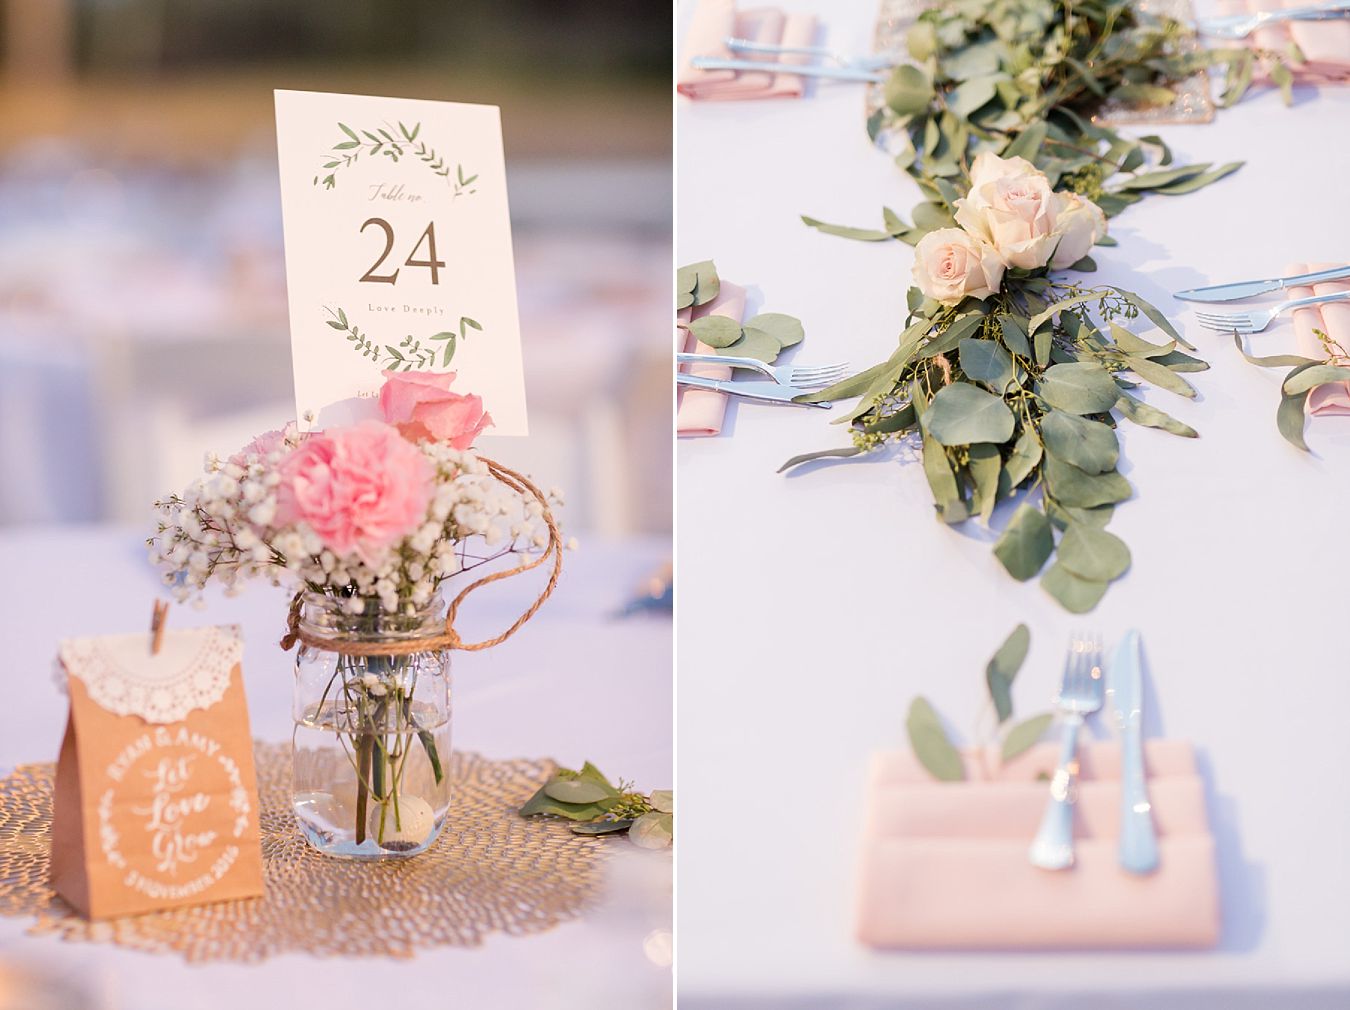 blush and greenery wedding colors, wedding centerpieces